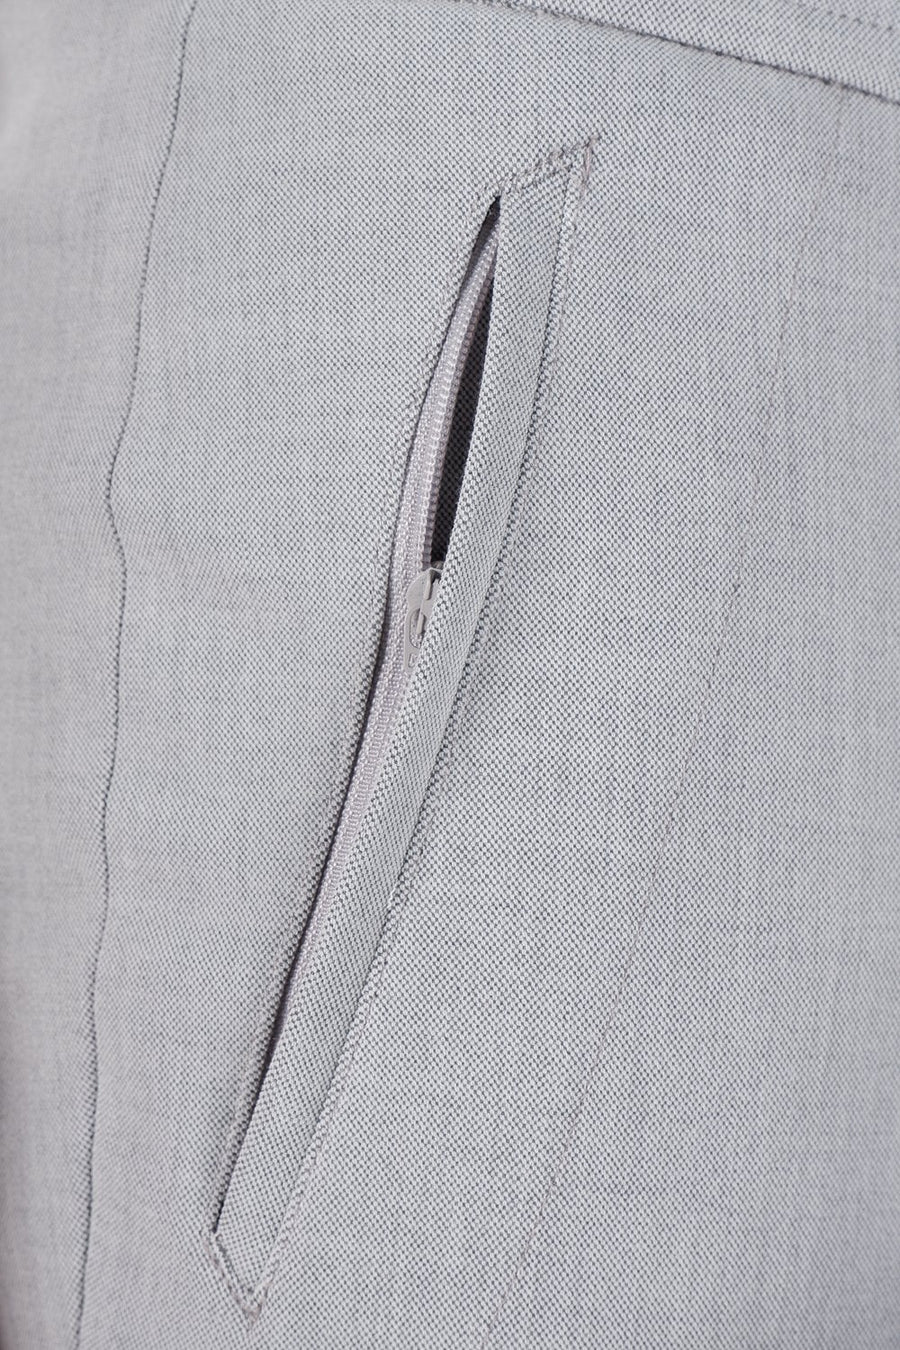 Buy the Remus Uomo Stretch Fit Cotton Trouser in Grey at Intro. Spend £50 for free UK delivery. Official stockists. We ship worldwide.